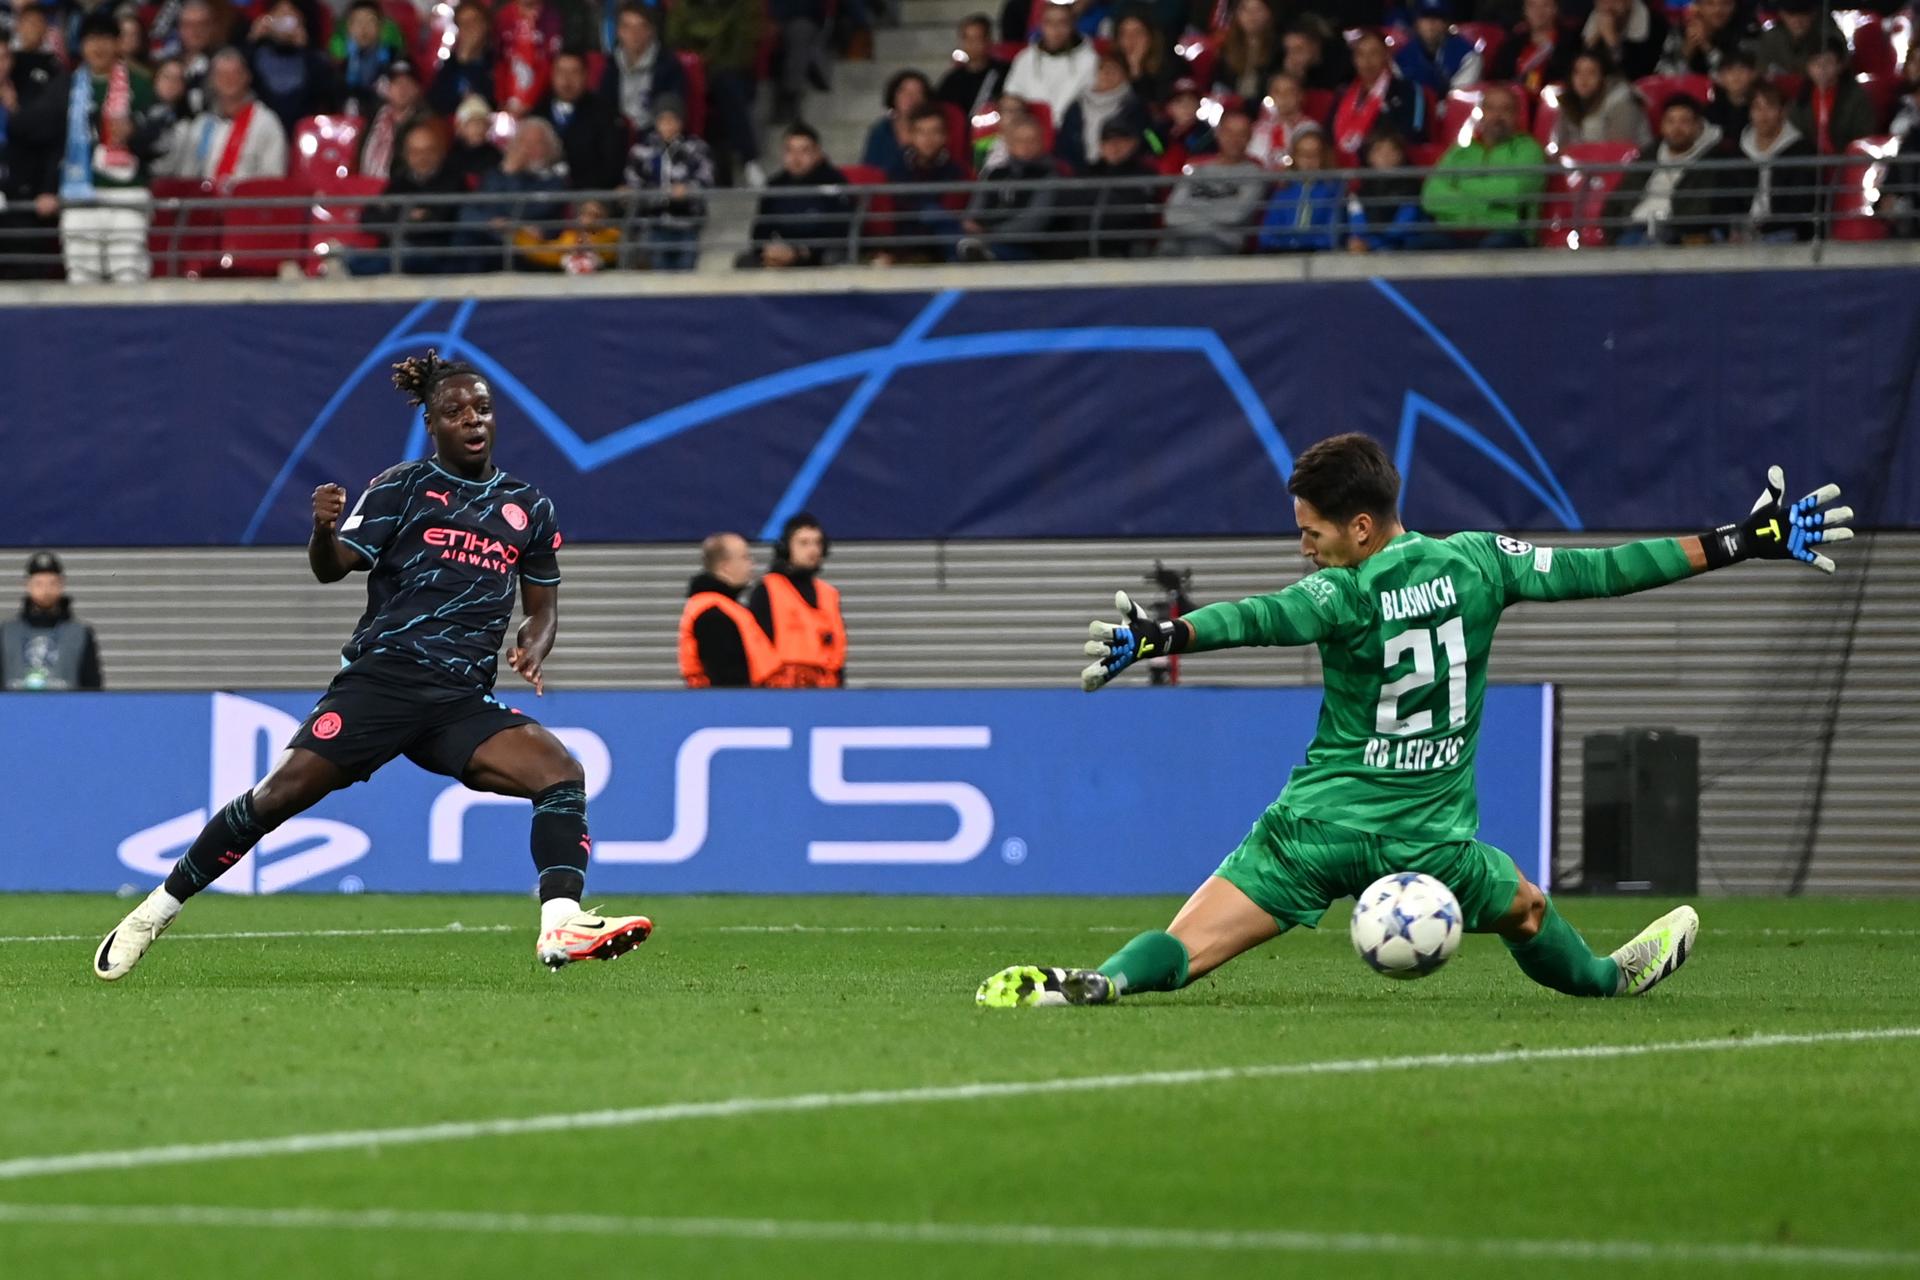 Leipzig (Germany), 04/10/2023.- Manchester City's Jeremy Doku (L) scores 1-3 against Leipzig's goalkeeper Janis Blaswich (R) during the UEFA Champions League group G soccer match between RB Leipzig and Manchester City, in Leipzig, Germany, 04 October 2023. (Liga de Campeones, Alemania) EFE/EPA/FILIP SINGER